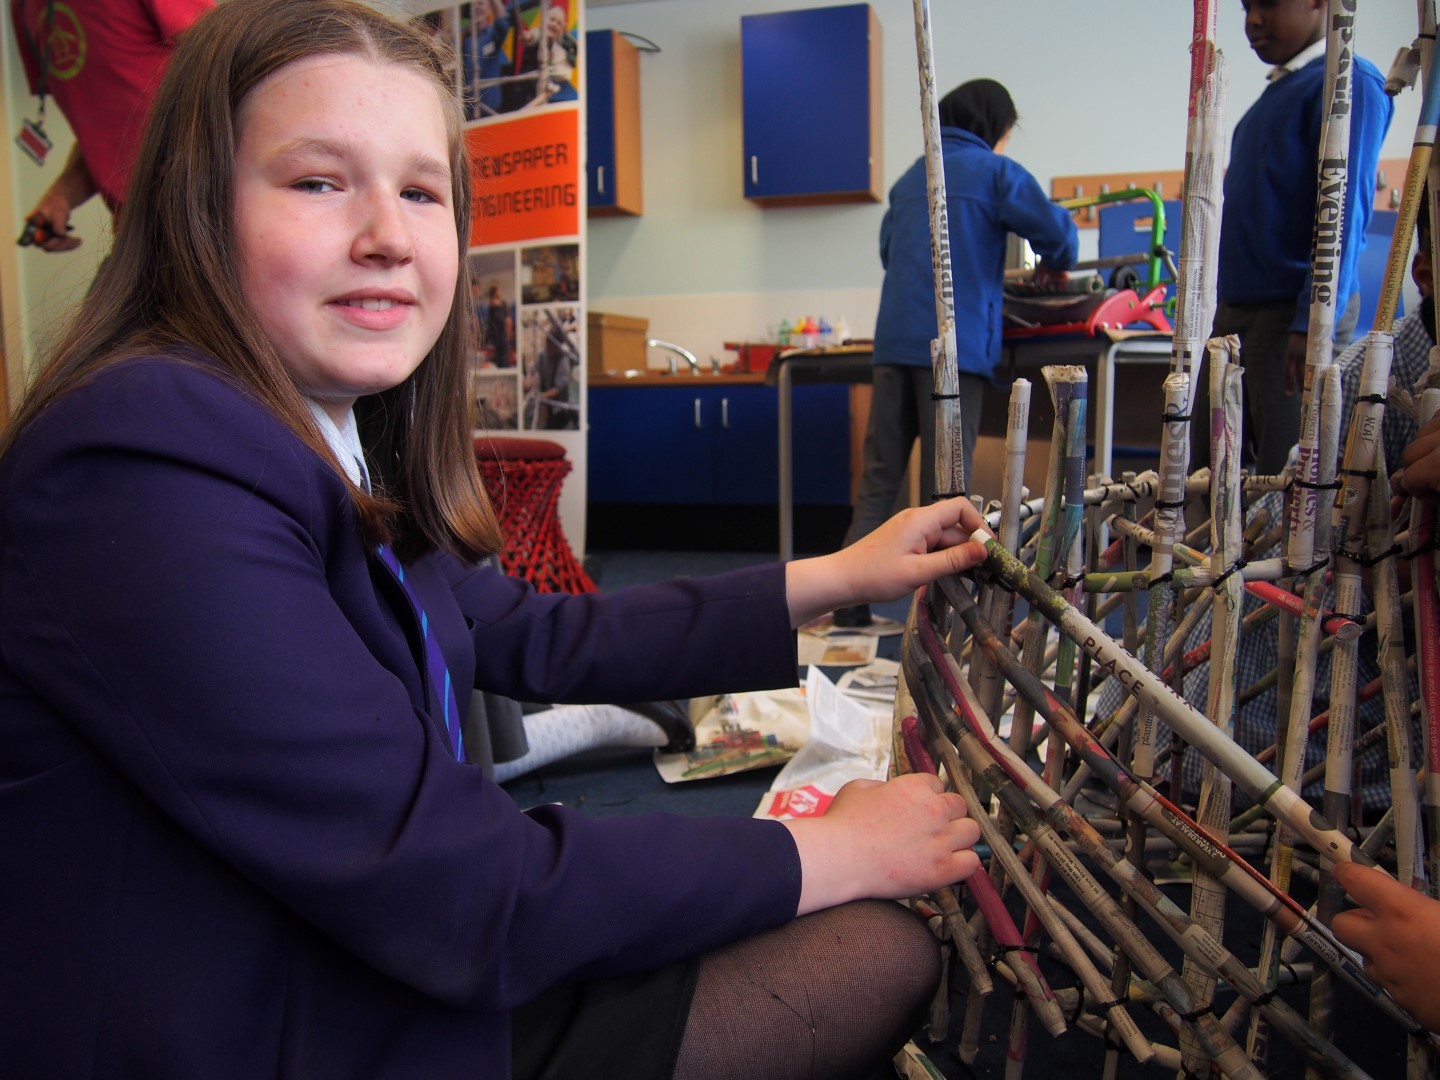 A pupil from a local secondary school helps out on the Newspaper Engineering activity at Willow Bank Primary Steam Co. Day